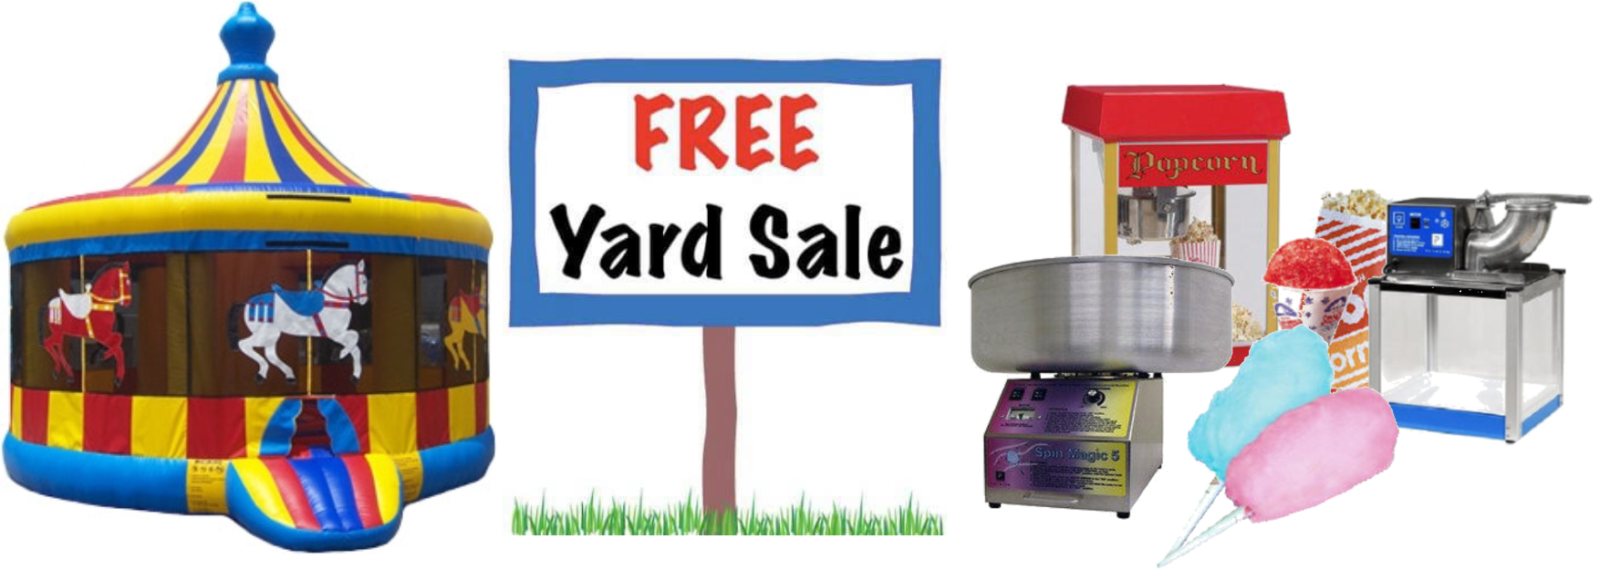 Free Yard Sale and Fall Festival